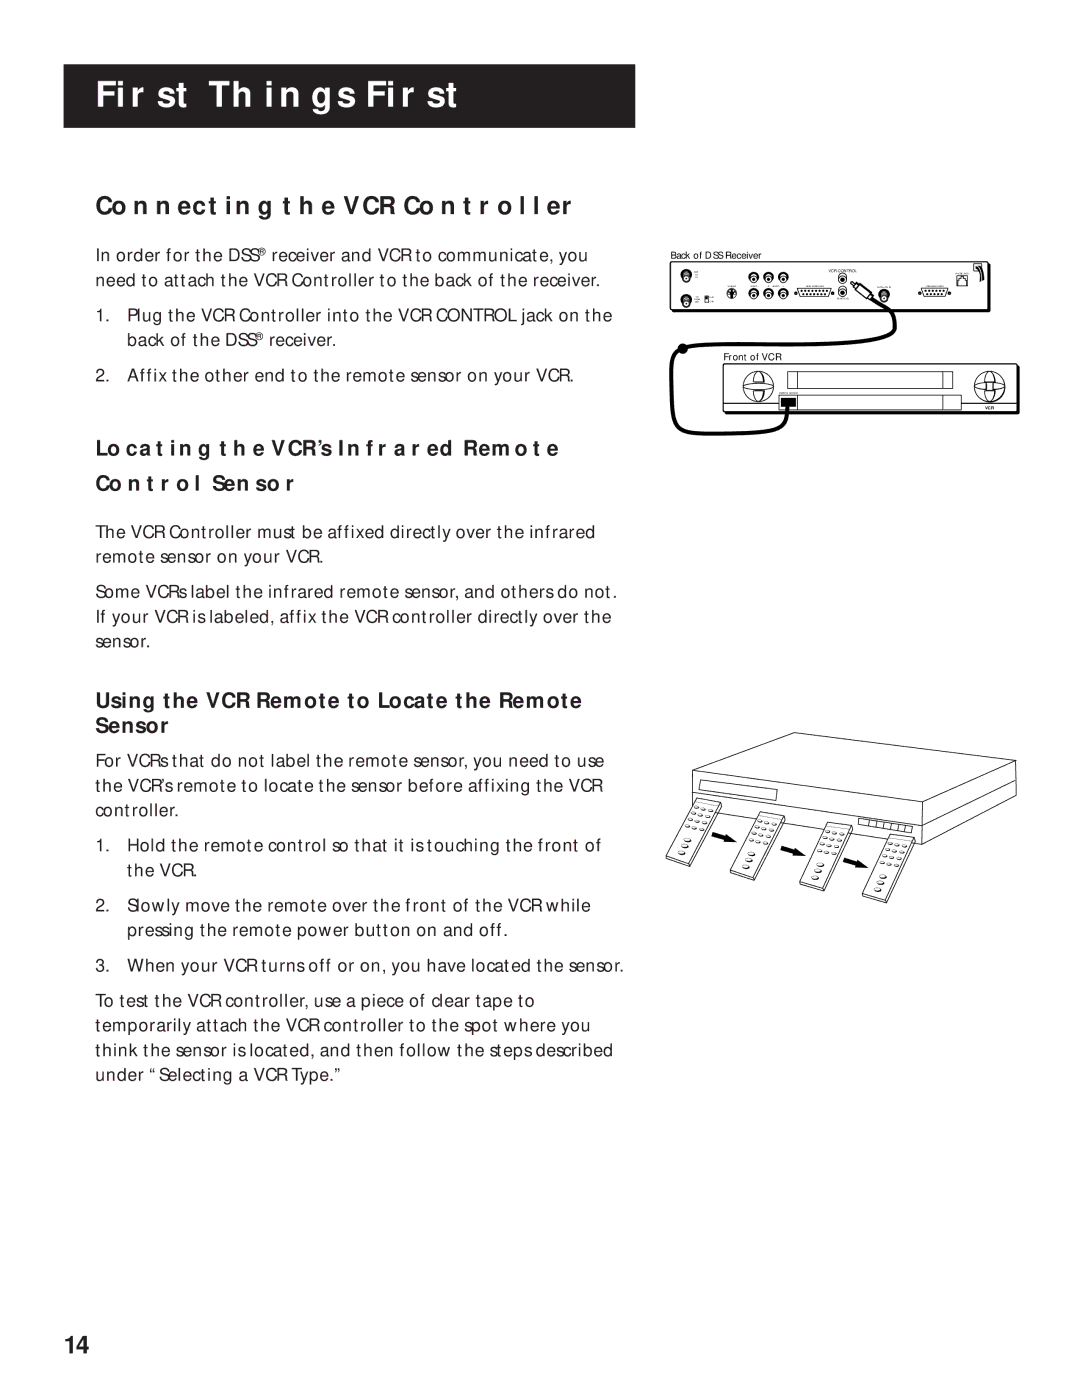 RCA DRD202RA manual Connecting the VCR Controller, Locating the VCR’S Infrared Remote Control Sensor 